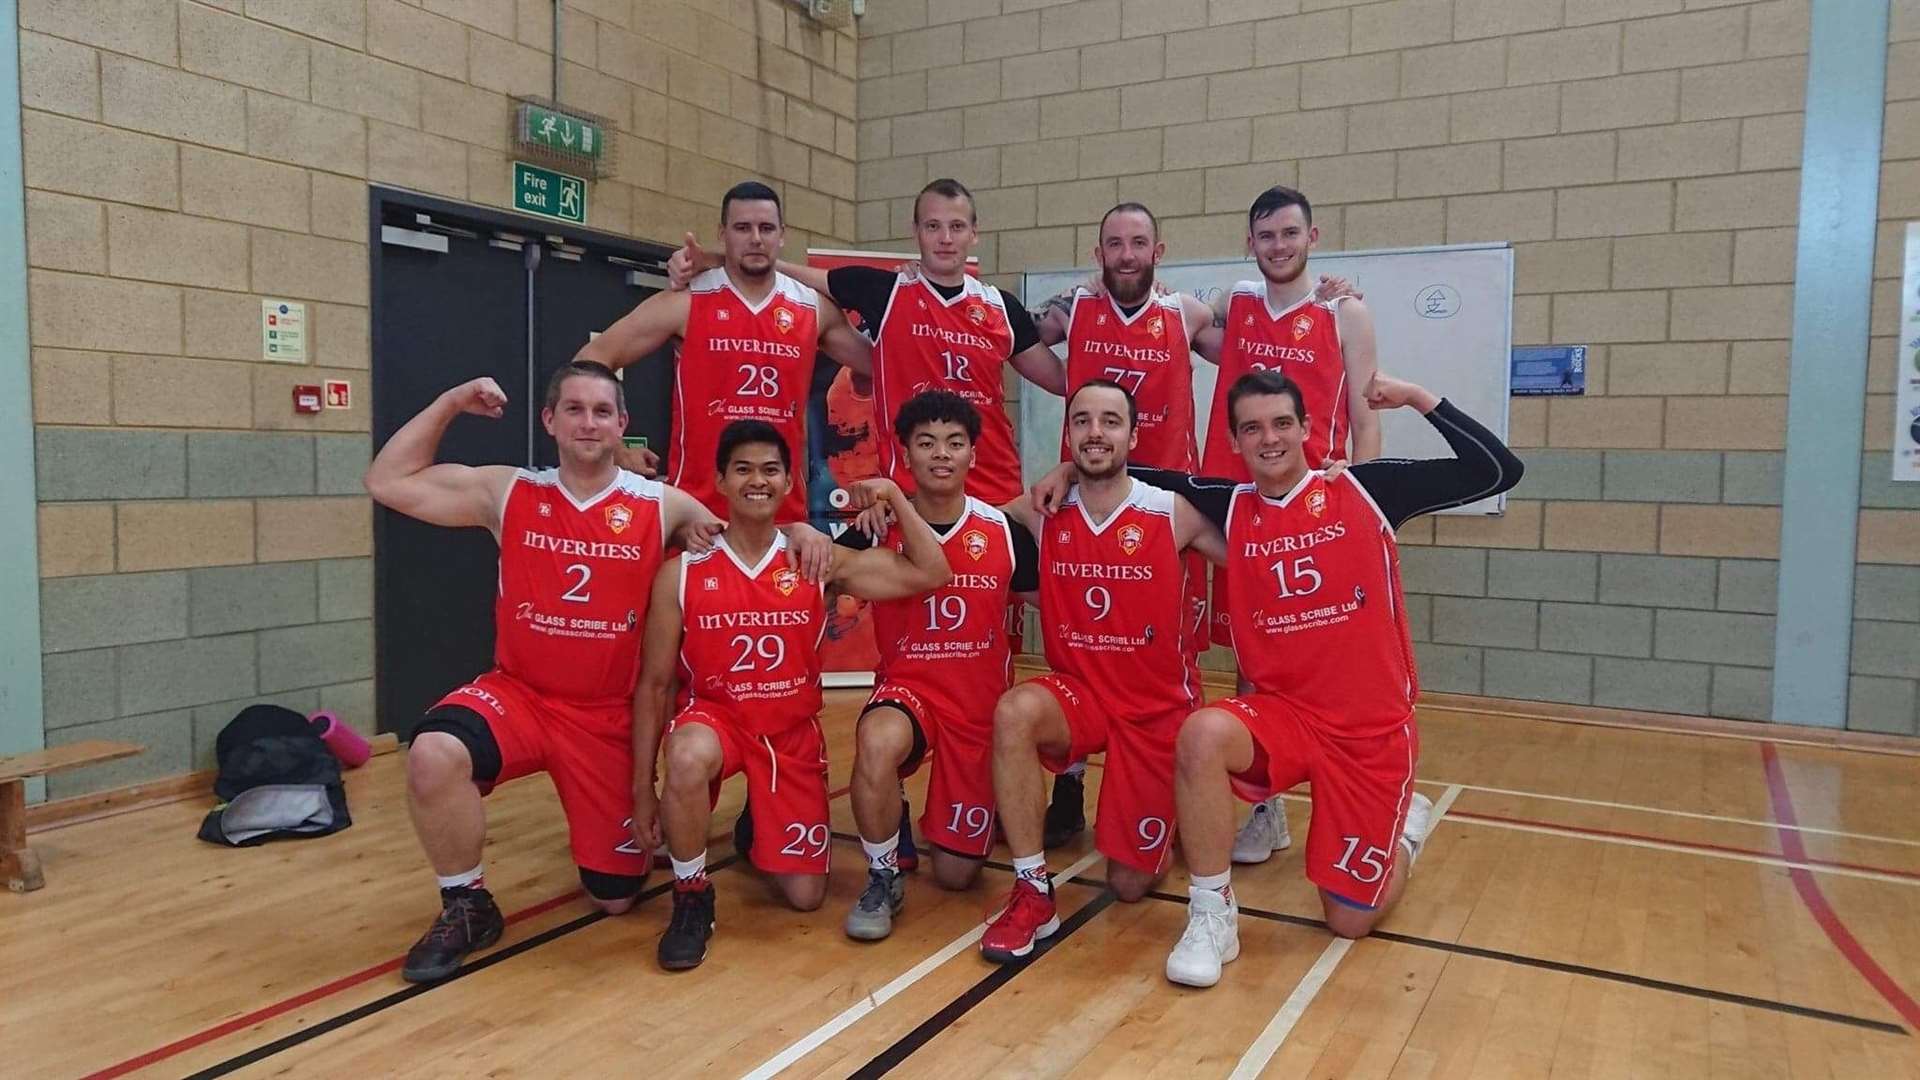 Inverness City Lions beat North Lanarkshire by 10 points.